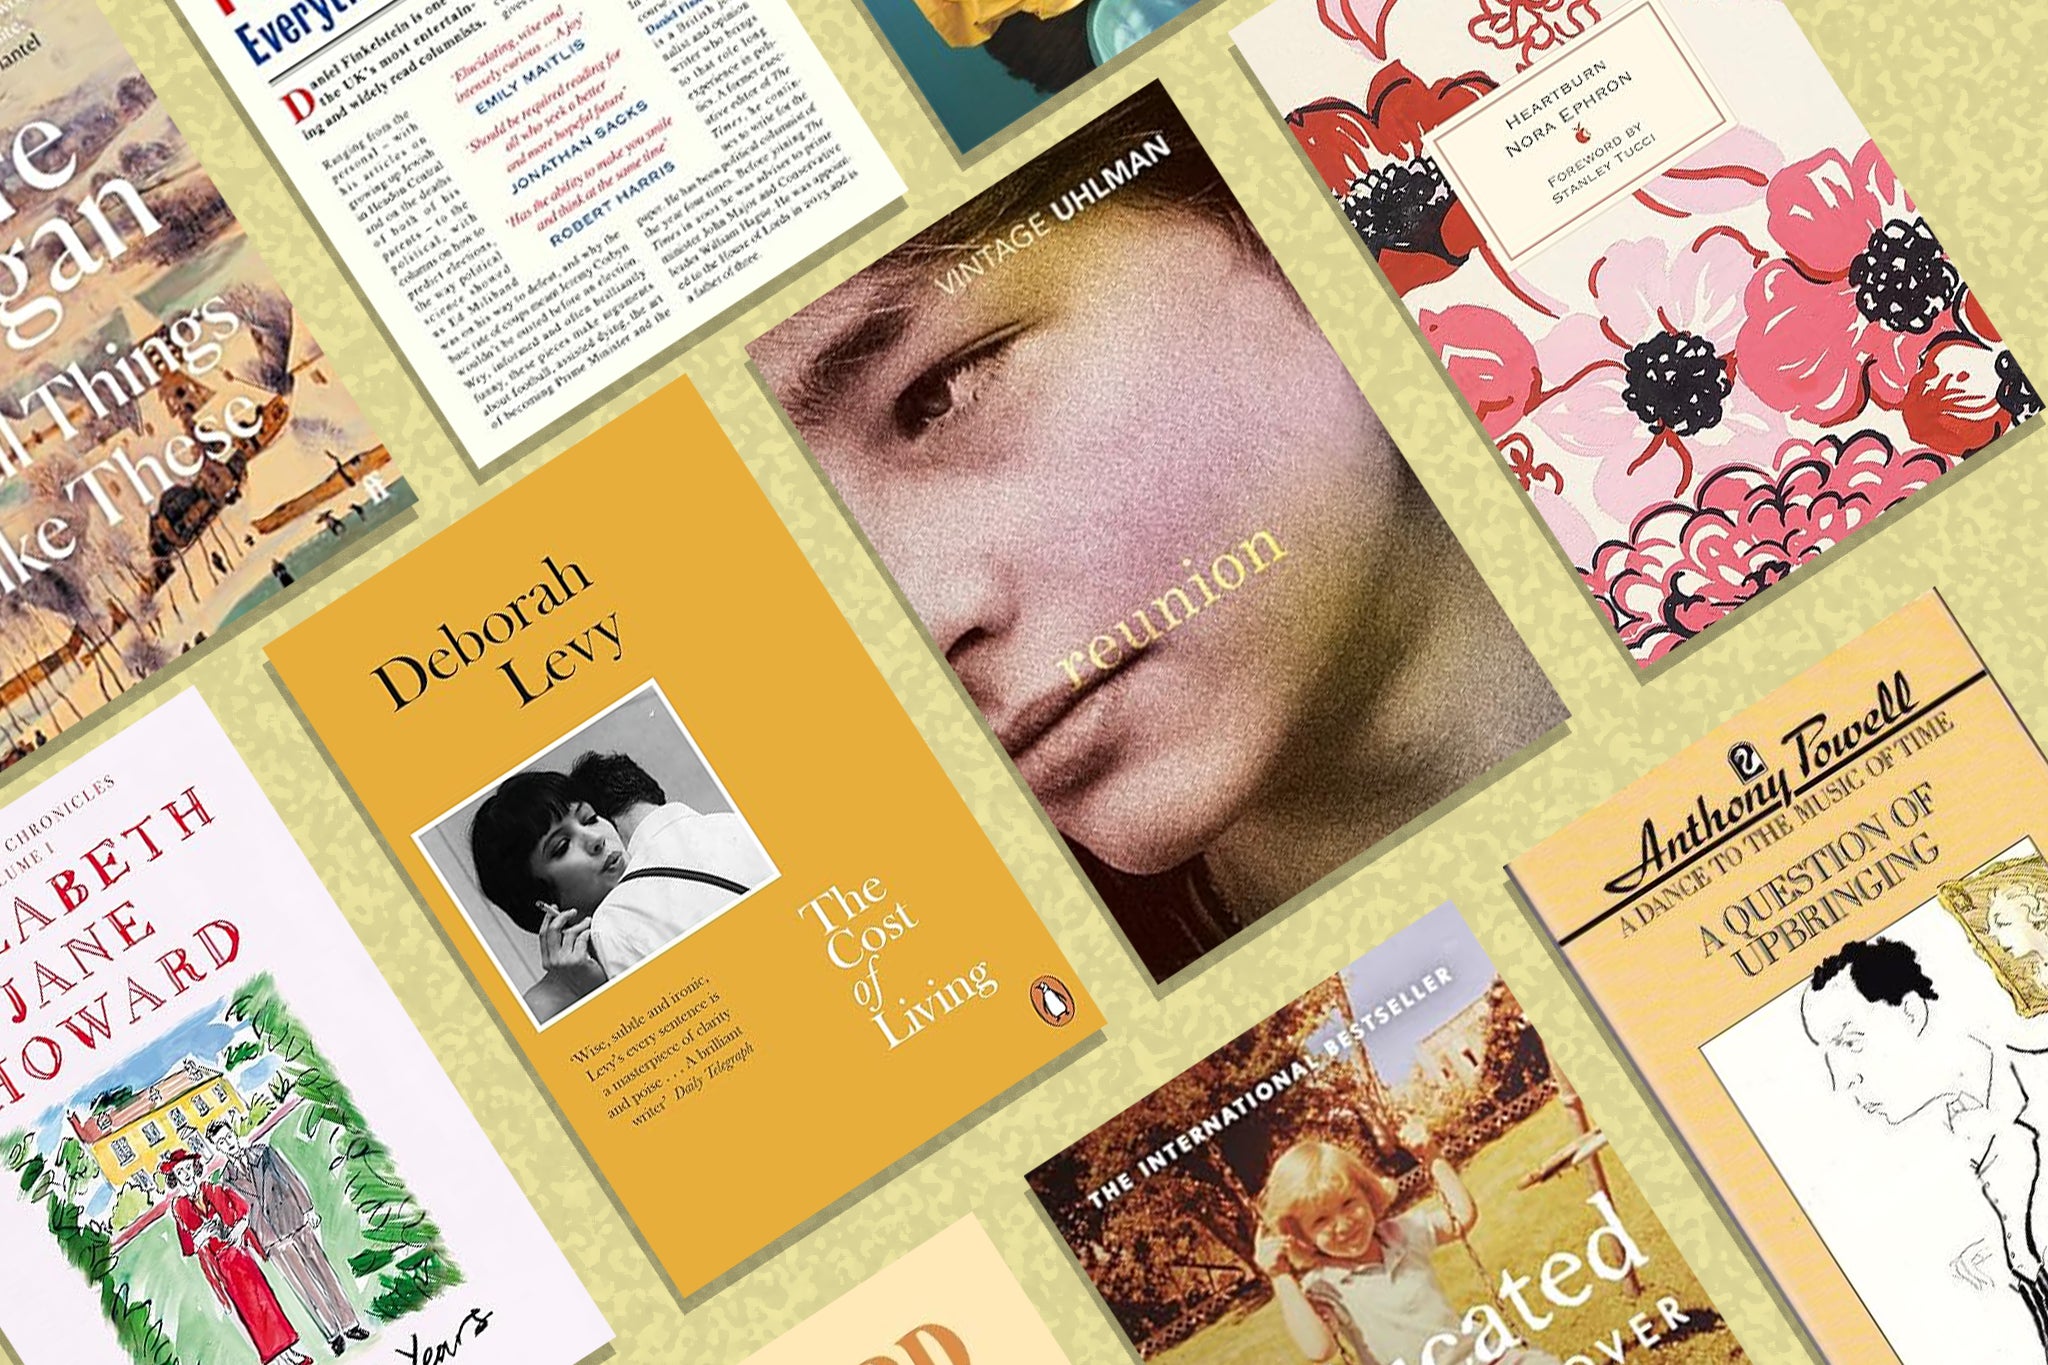 The Best Books to Give as Gifts